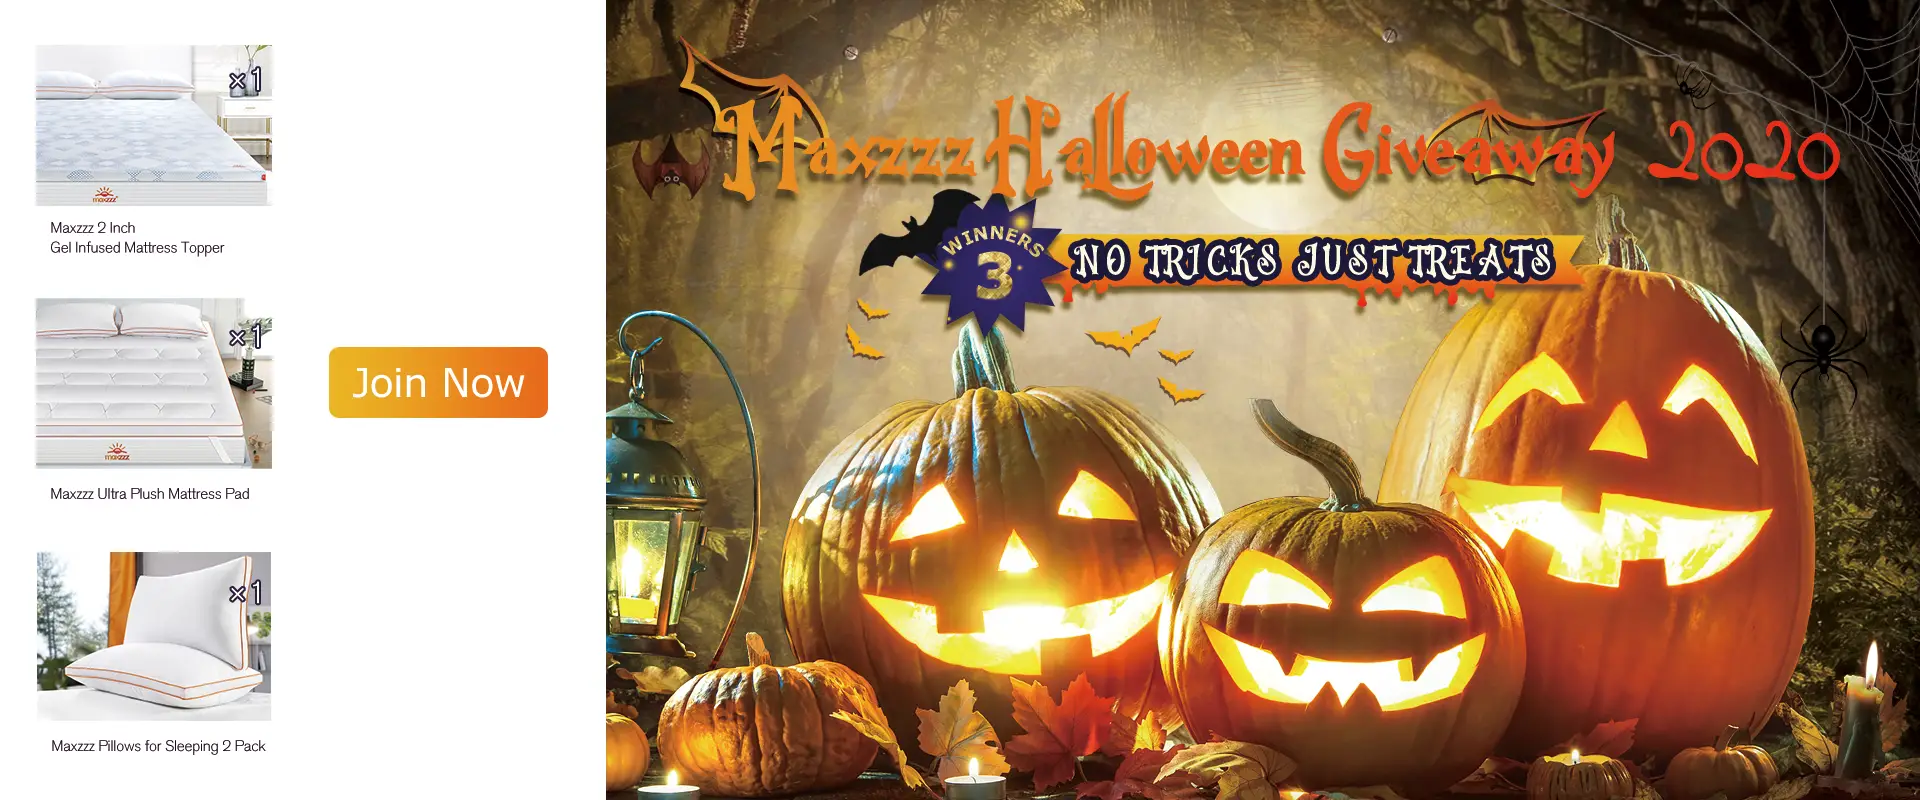 Maxzzz is giving away plush mattress pads, toppers and pillows. Halloween may be over but this giveaway extends to November 9th so make sure you enter. 3 Lucky winners will be chosen randomly. Make sure to check back to see if you are one of our winners. The giveaway is open to U.S. and Canada Residents.